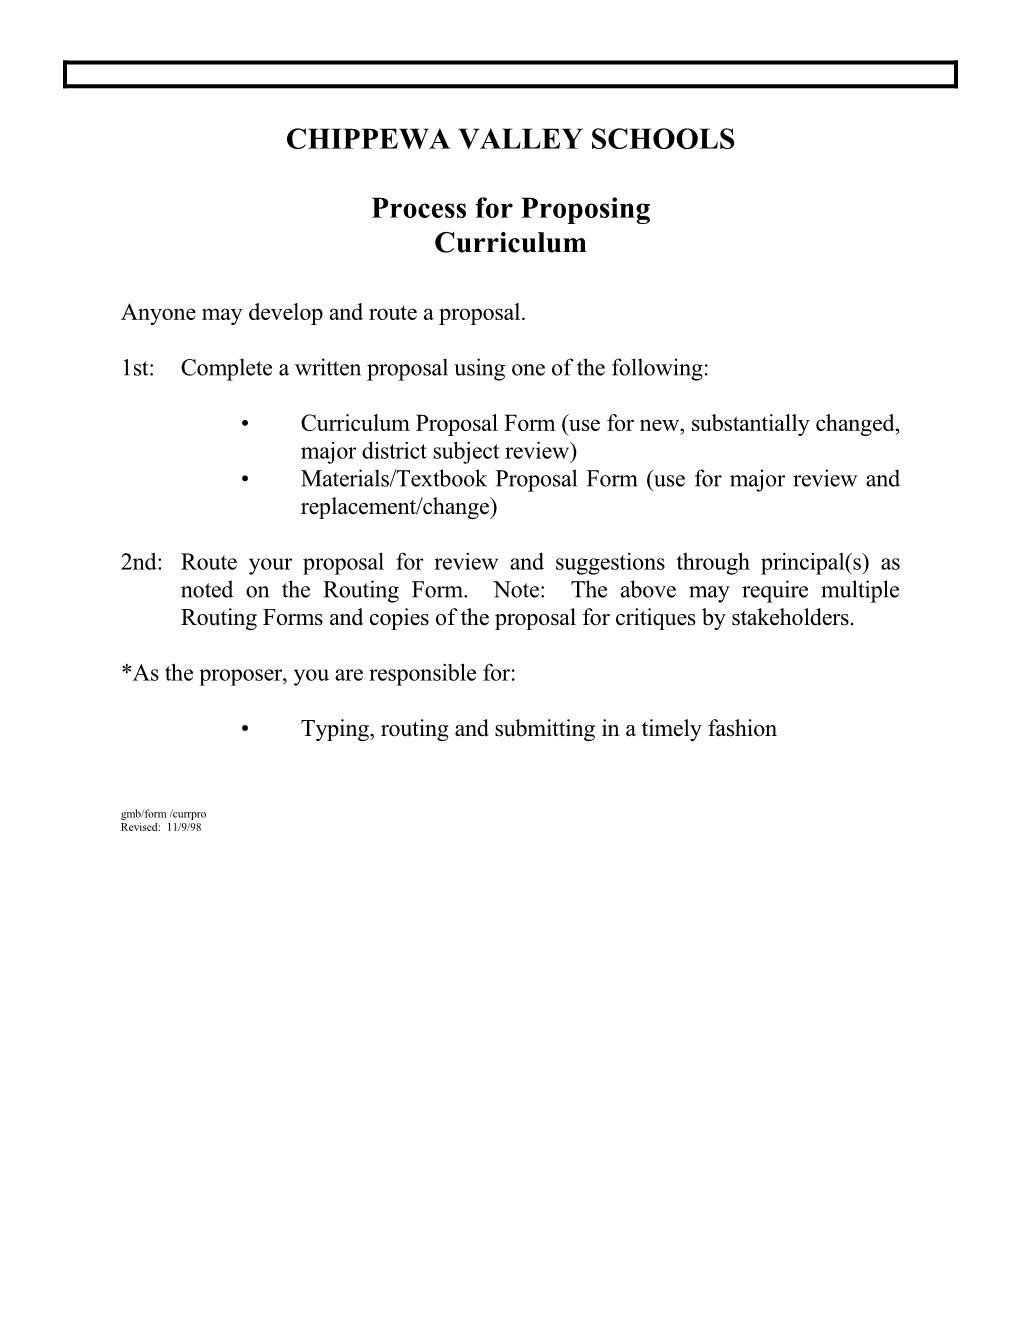 Process for Proposing